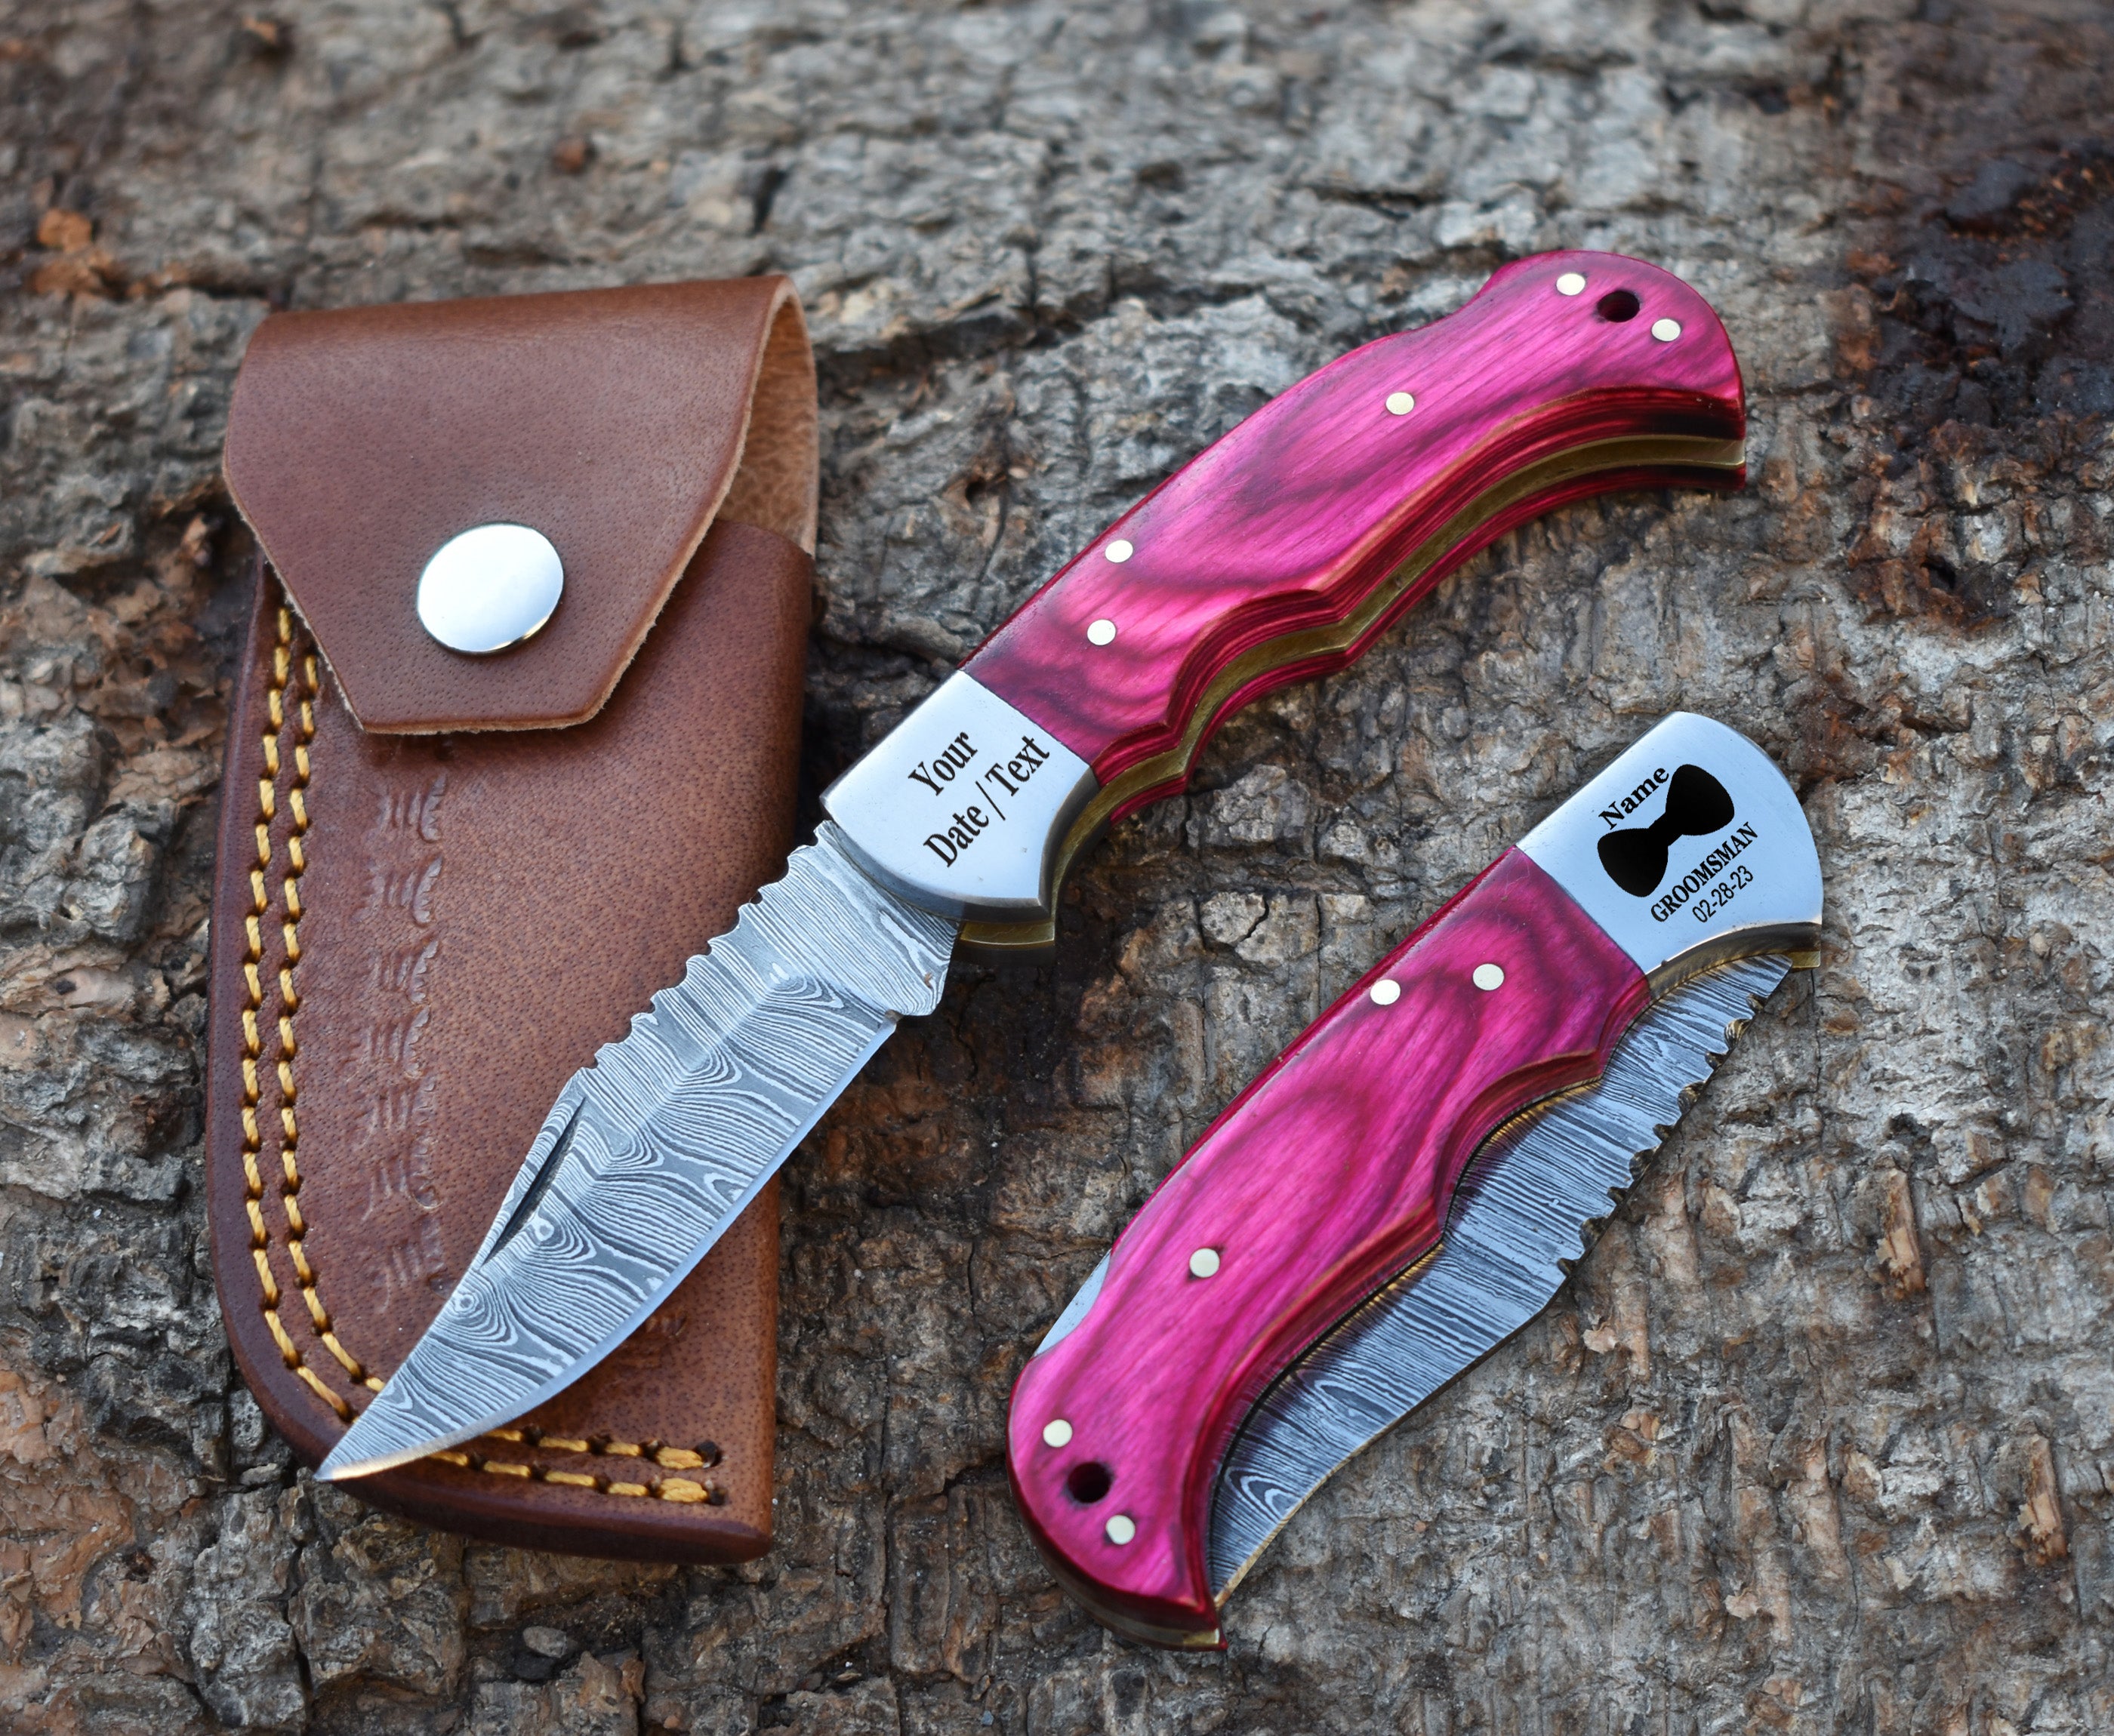 6.5" Handmade Damascus Steel Folding Knife Pink Pakka Wood Handle Back Lock Pocket Knife With Leather Pouch Personalized Gift for Men.